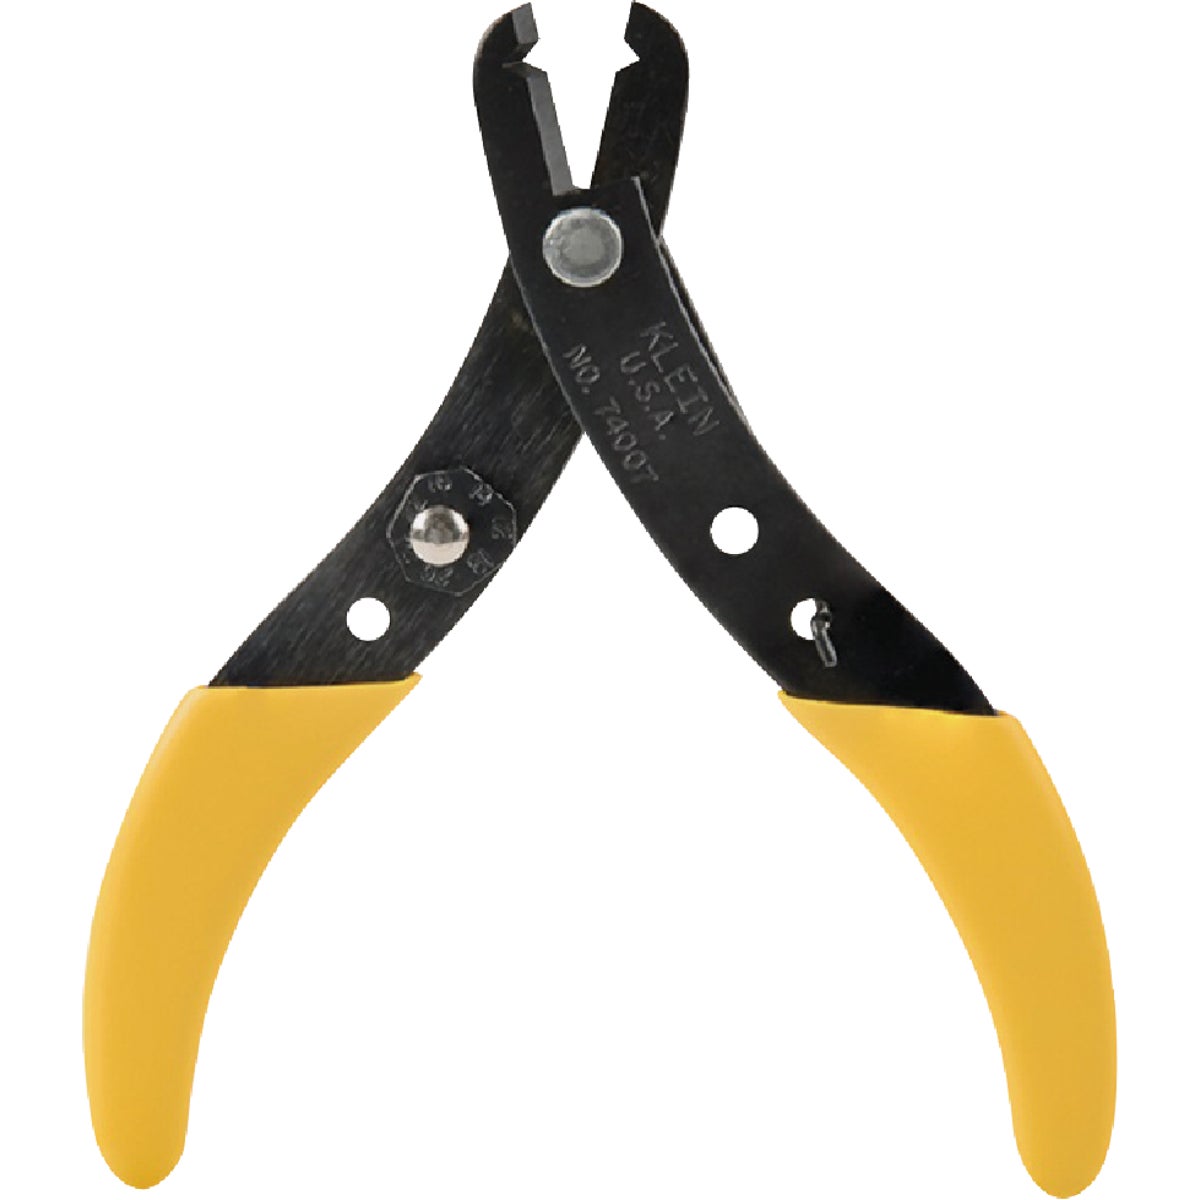 Klein 5-1/8 In. 12 AWG to 24 AWG Black Oxide Finish Wire Stripper